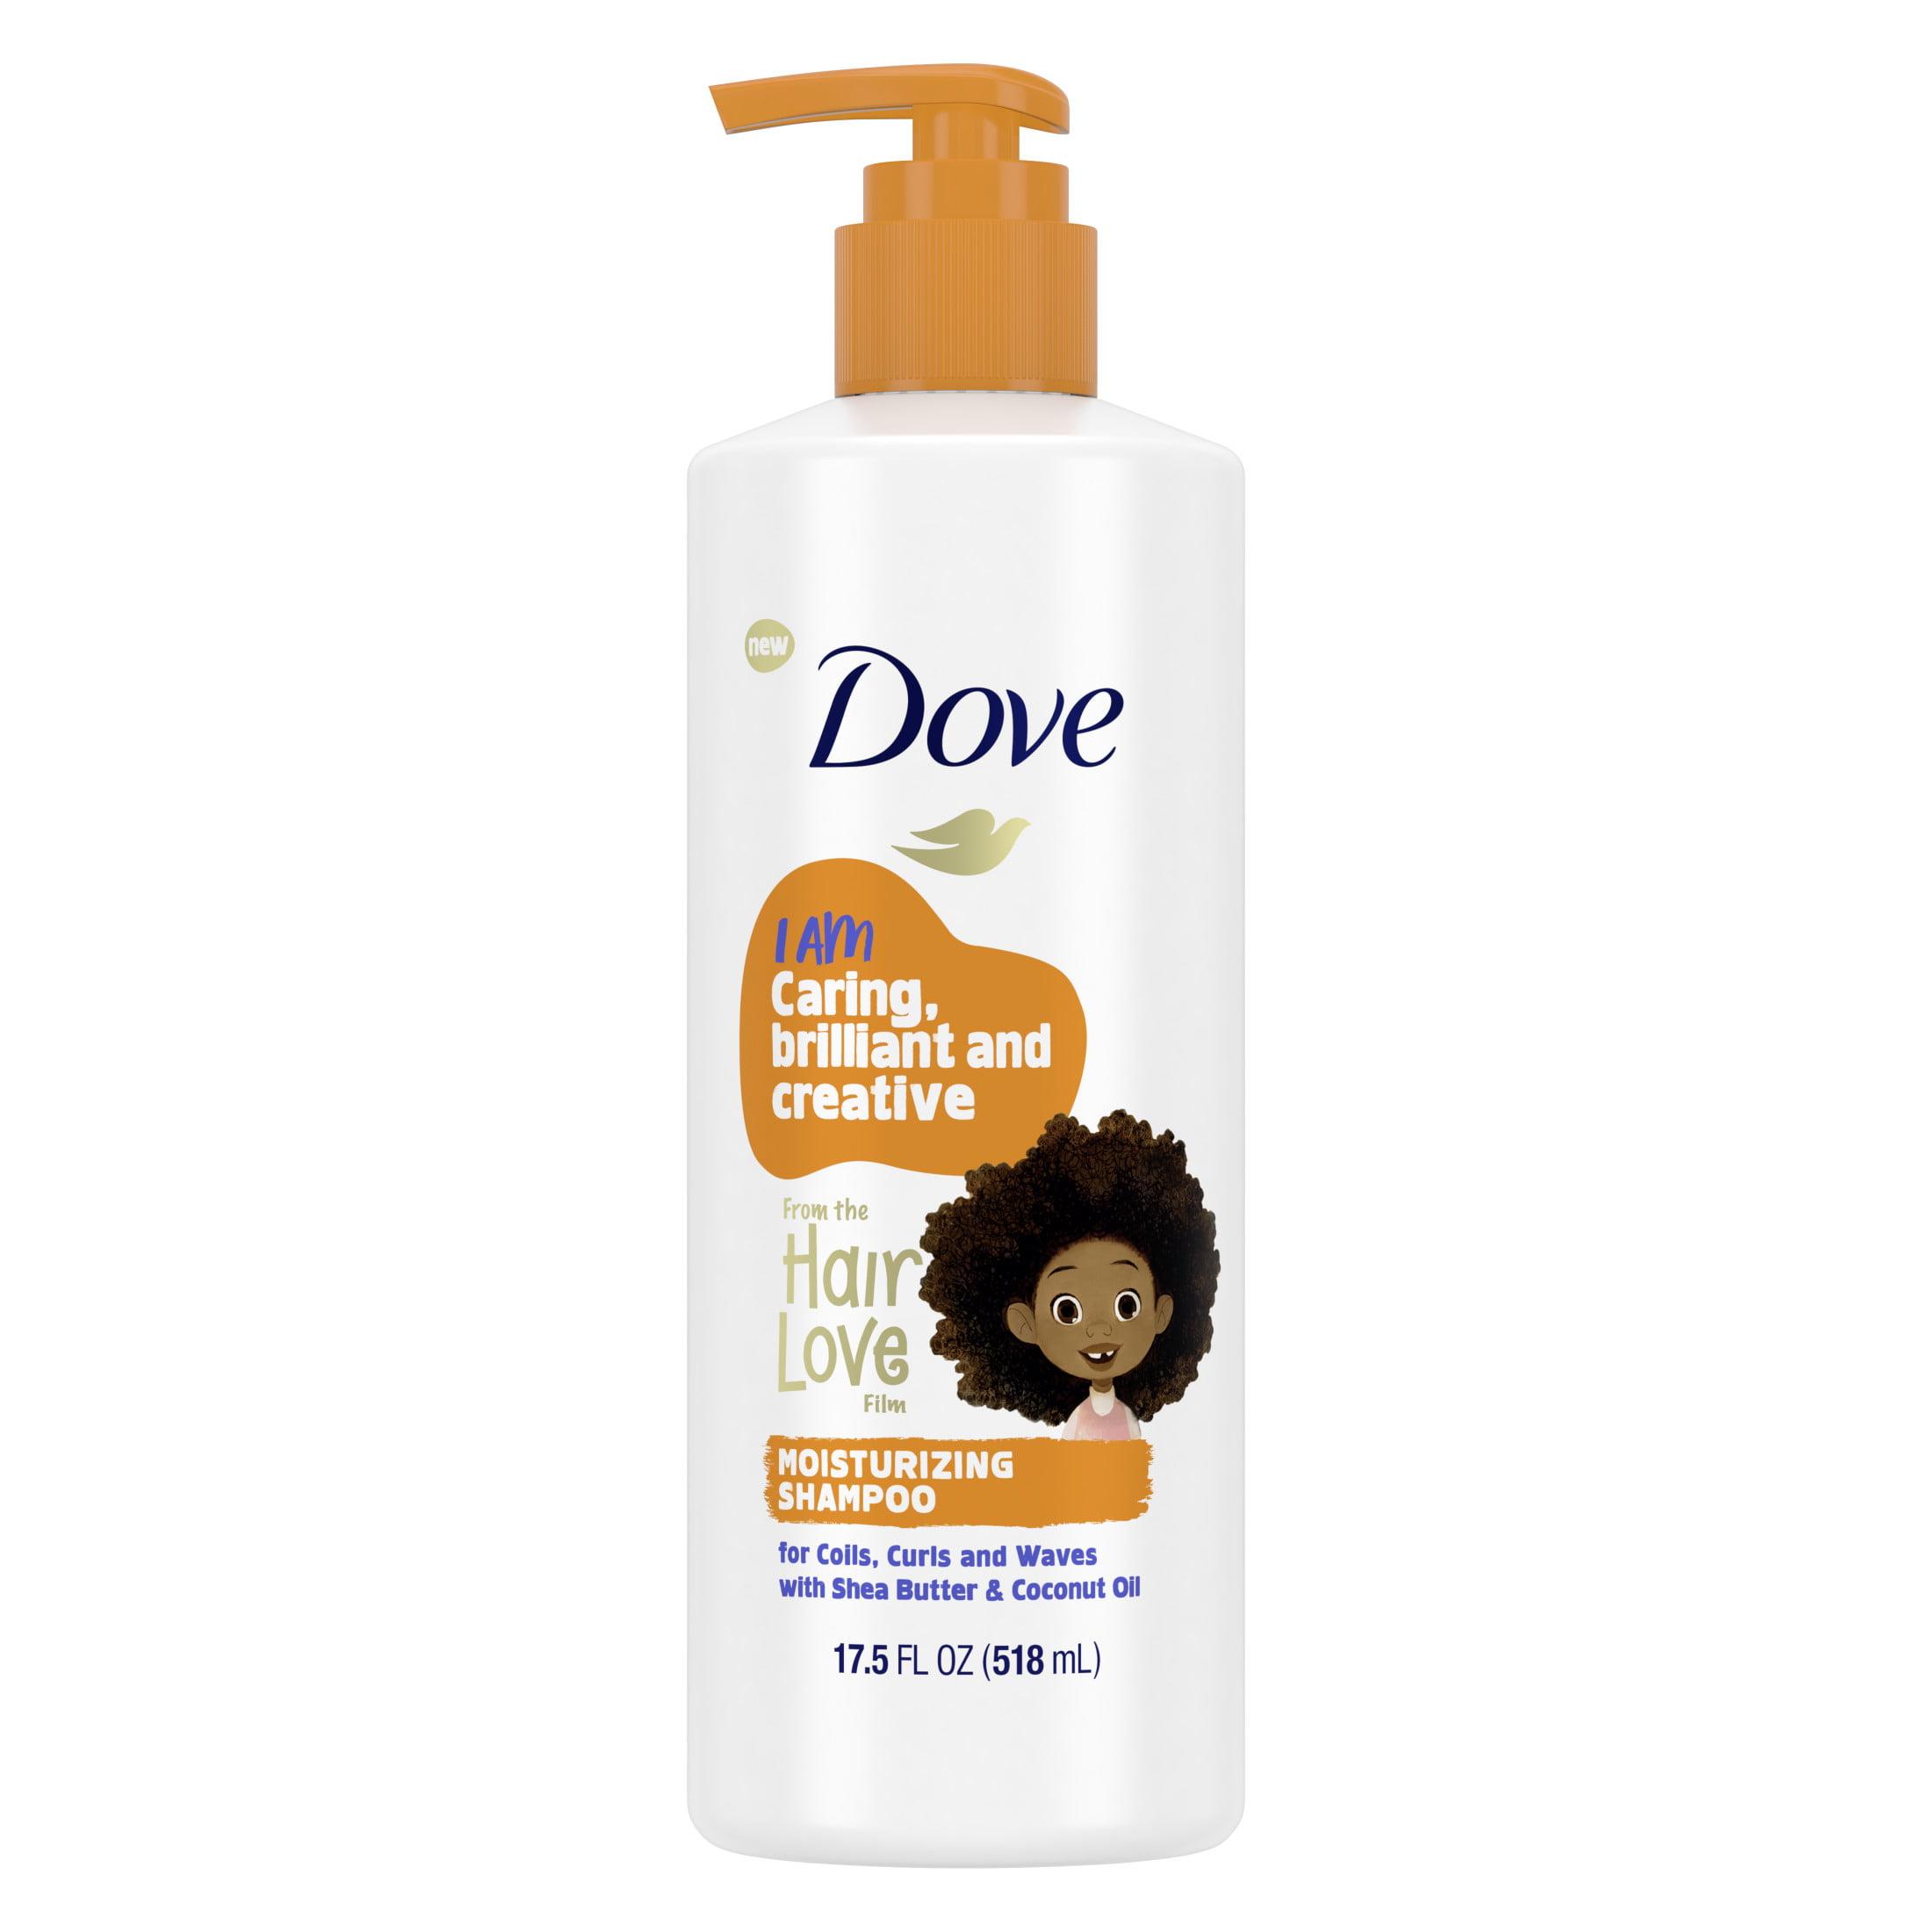 Dove Hair Love Moisturizing Kids Daily Shampoo with Shea Butter and Coconut Oil, 17.5 fl oz - image 1 of 11